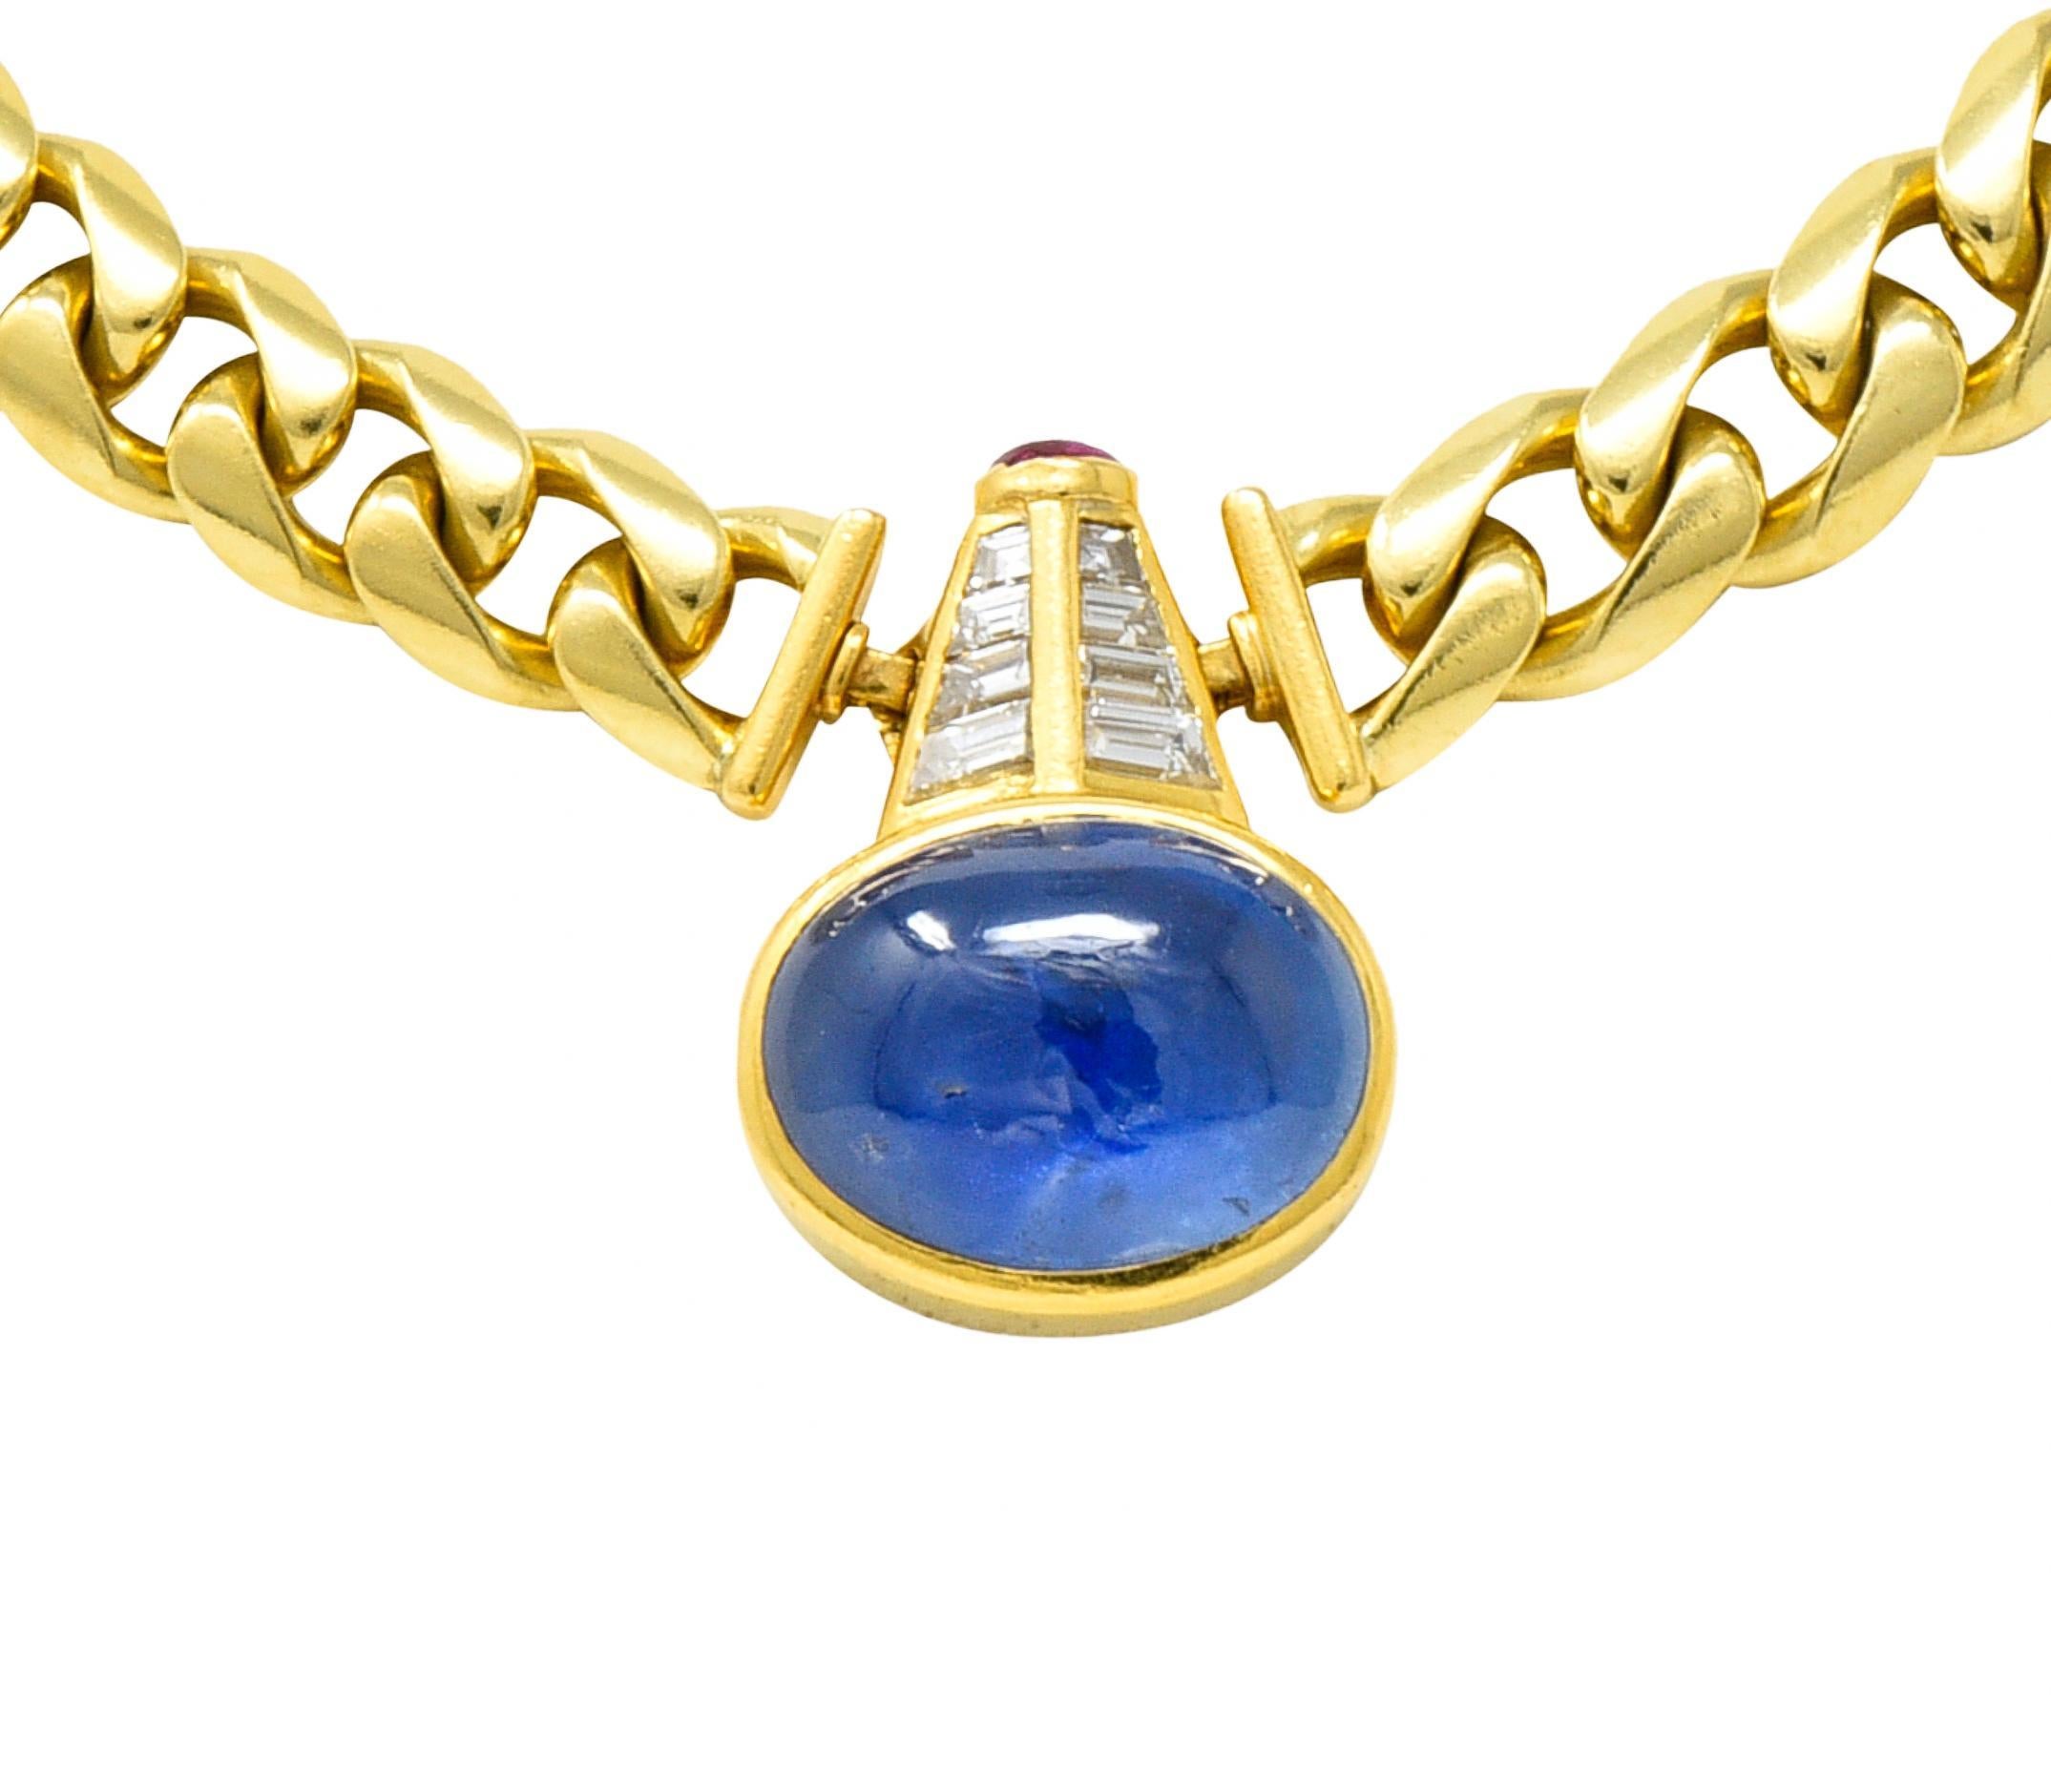 Designed as a curb chain with a central station featuring an oval shaped sapphire cabochon
Natural Burmese in origin with no indications of heat treatment 
Weighing approximately 17.16 carats total - bezel set East to West
Transparent blue in